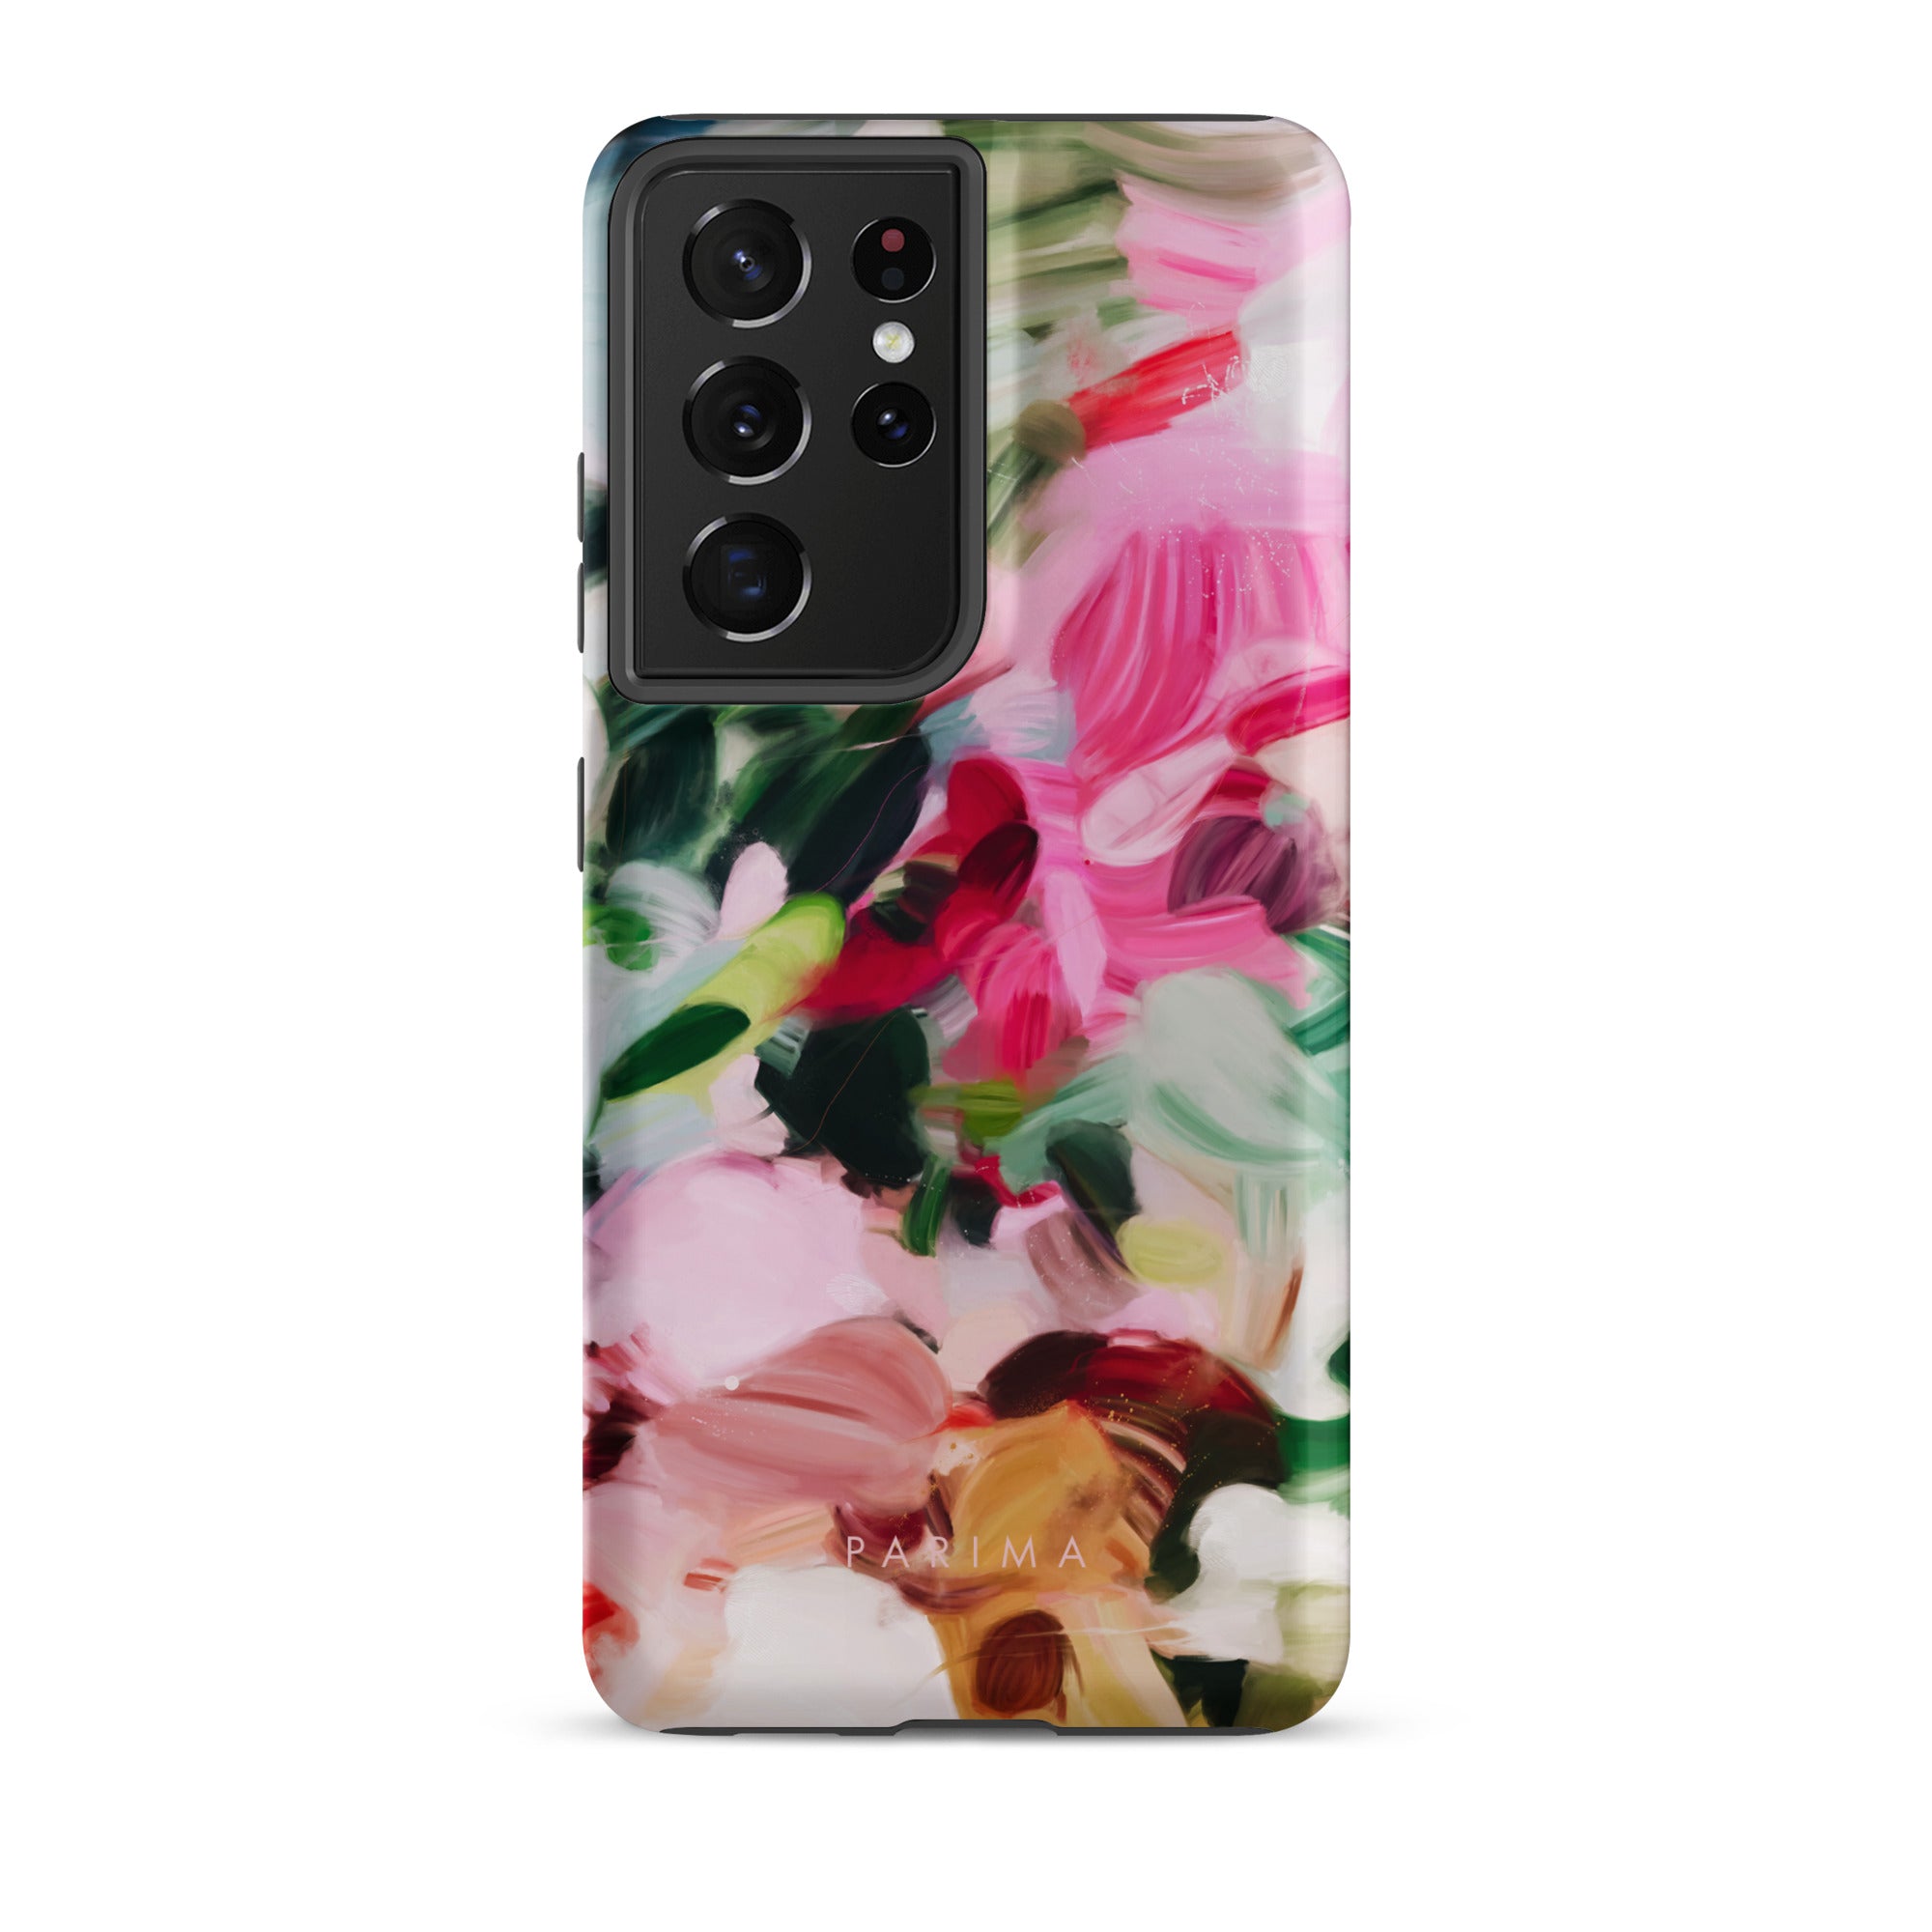 Bloom, pink and green abstract art on Samsung Galaxy S21 Ultra tough case by Parima Studio